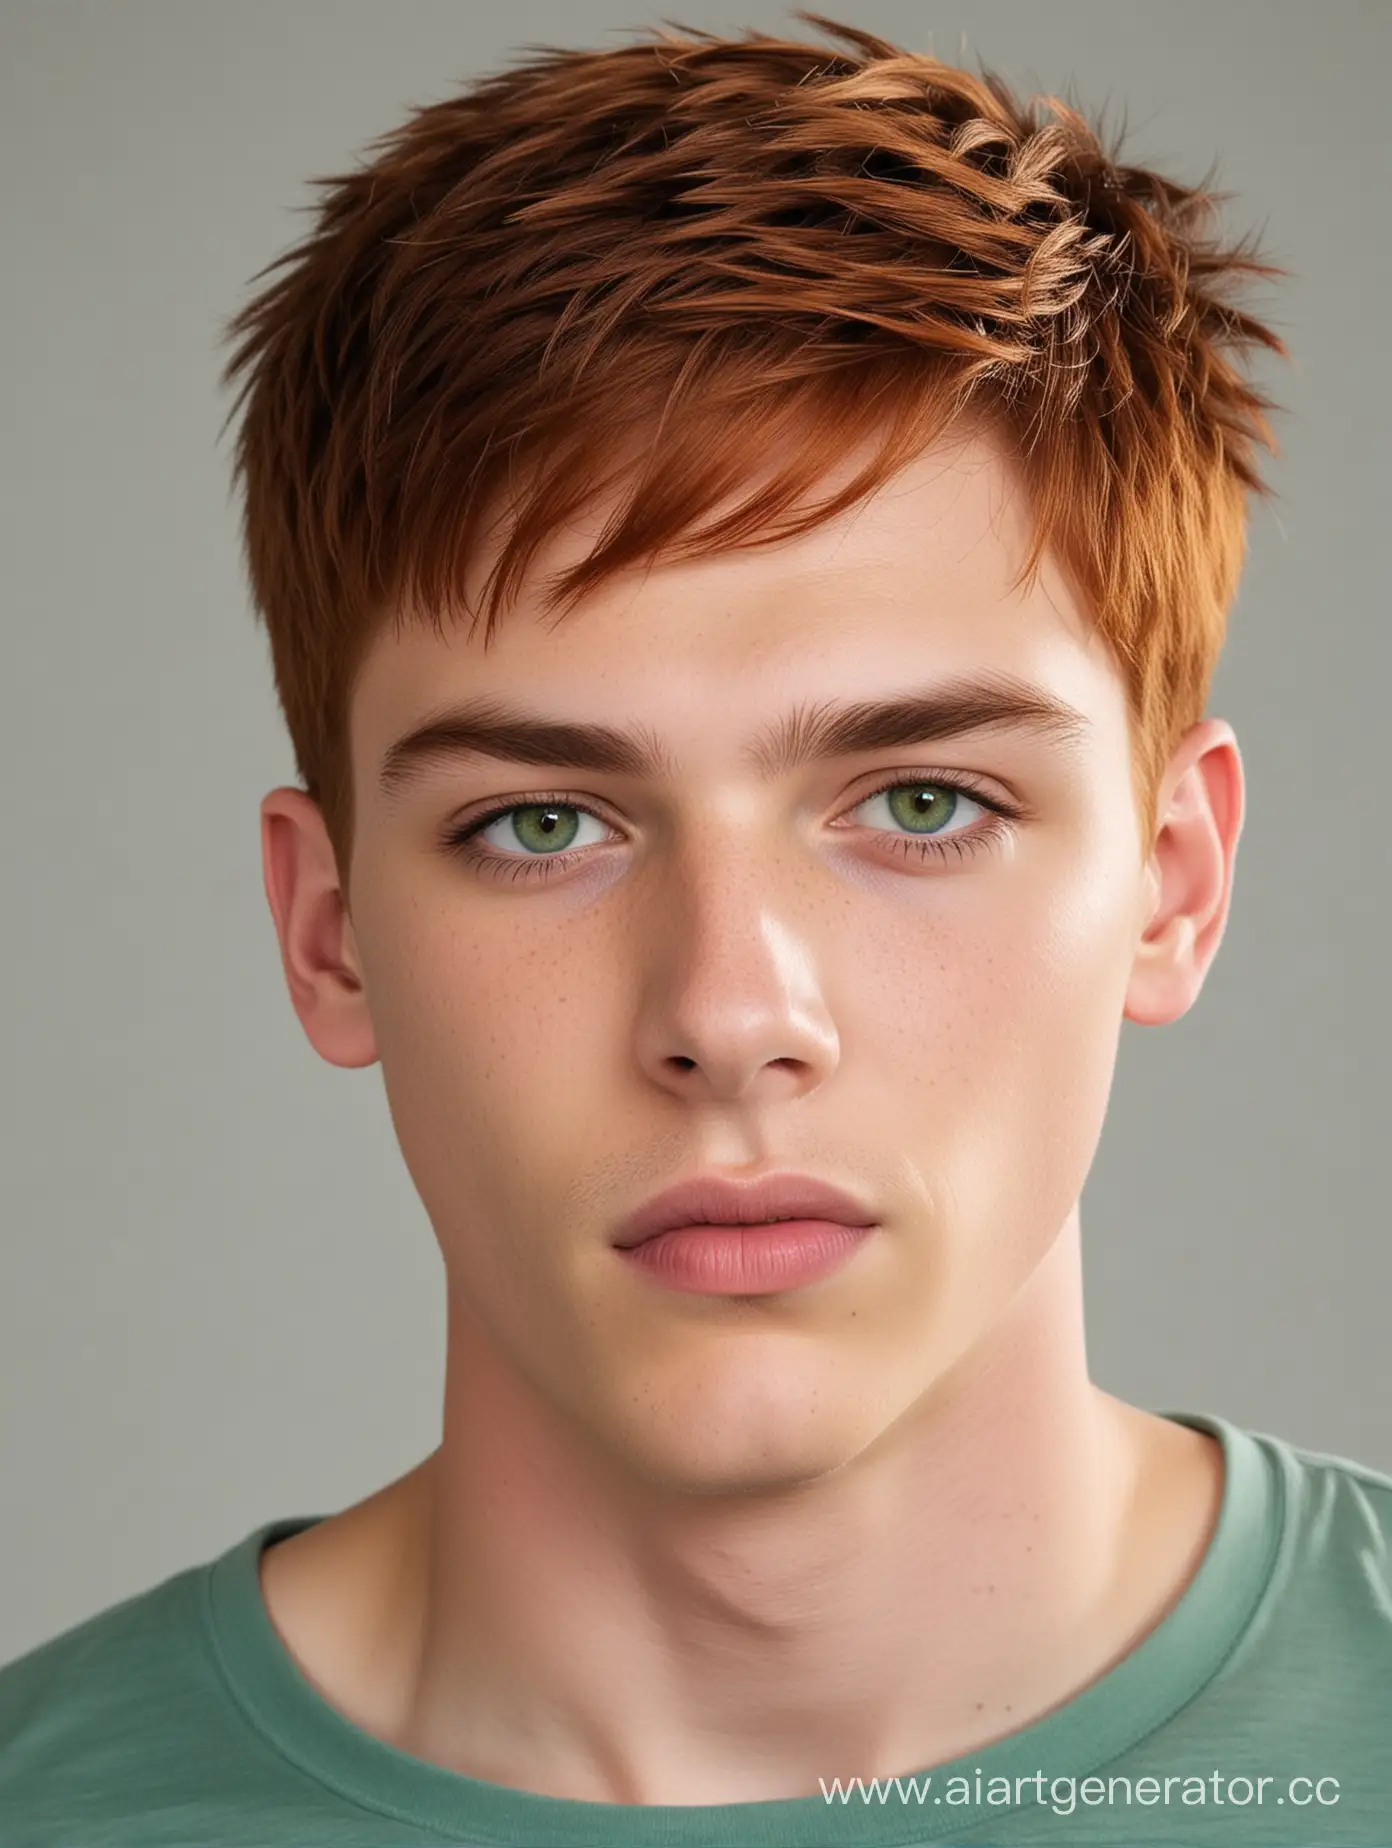 Slim-18YearOld-Guy-with-Vibrant-Red-Hair-and-Green-Eyes